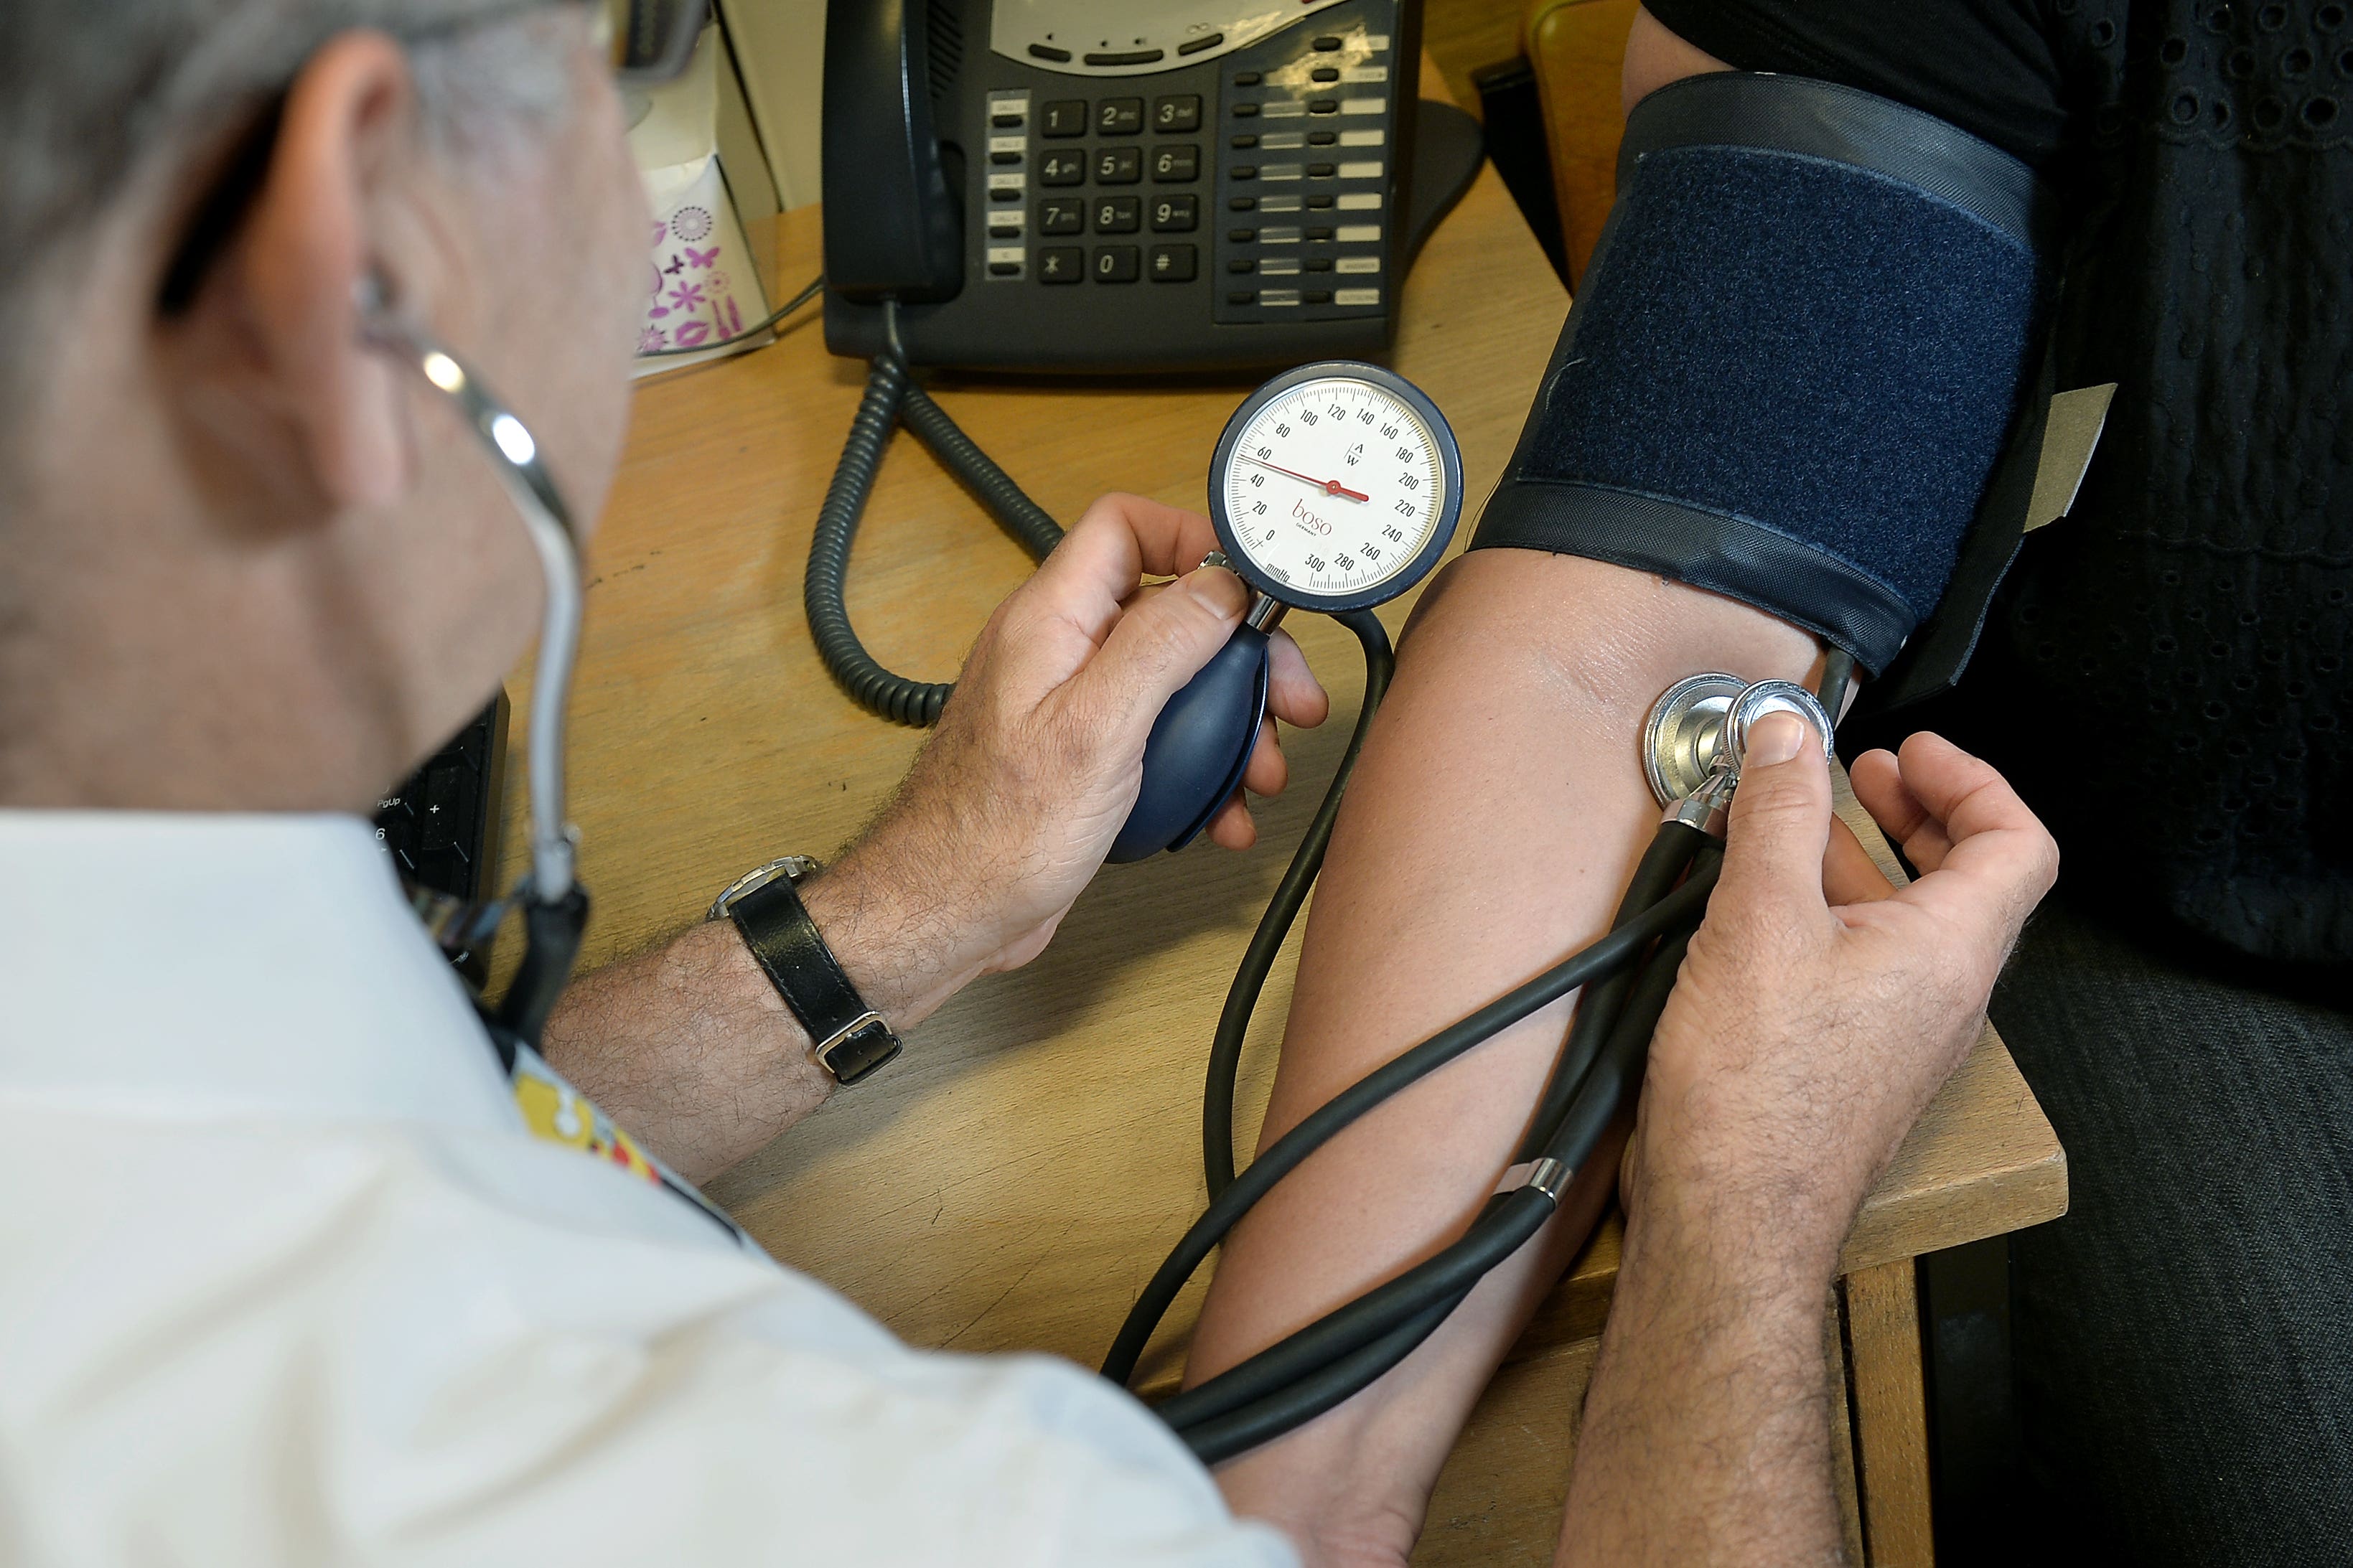 Researchers said ‘effective communication’ between doctors and patients regarding long-term health risks after a heart attack could be beneficial for patients (Anthony Devlin/PA)